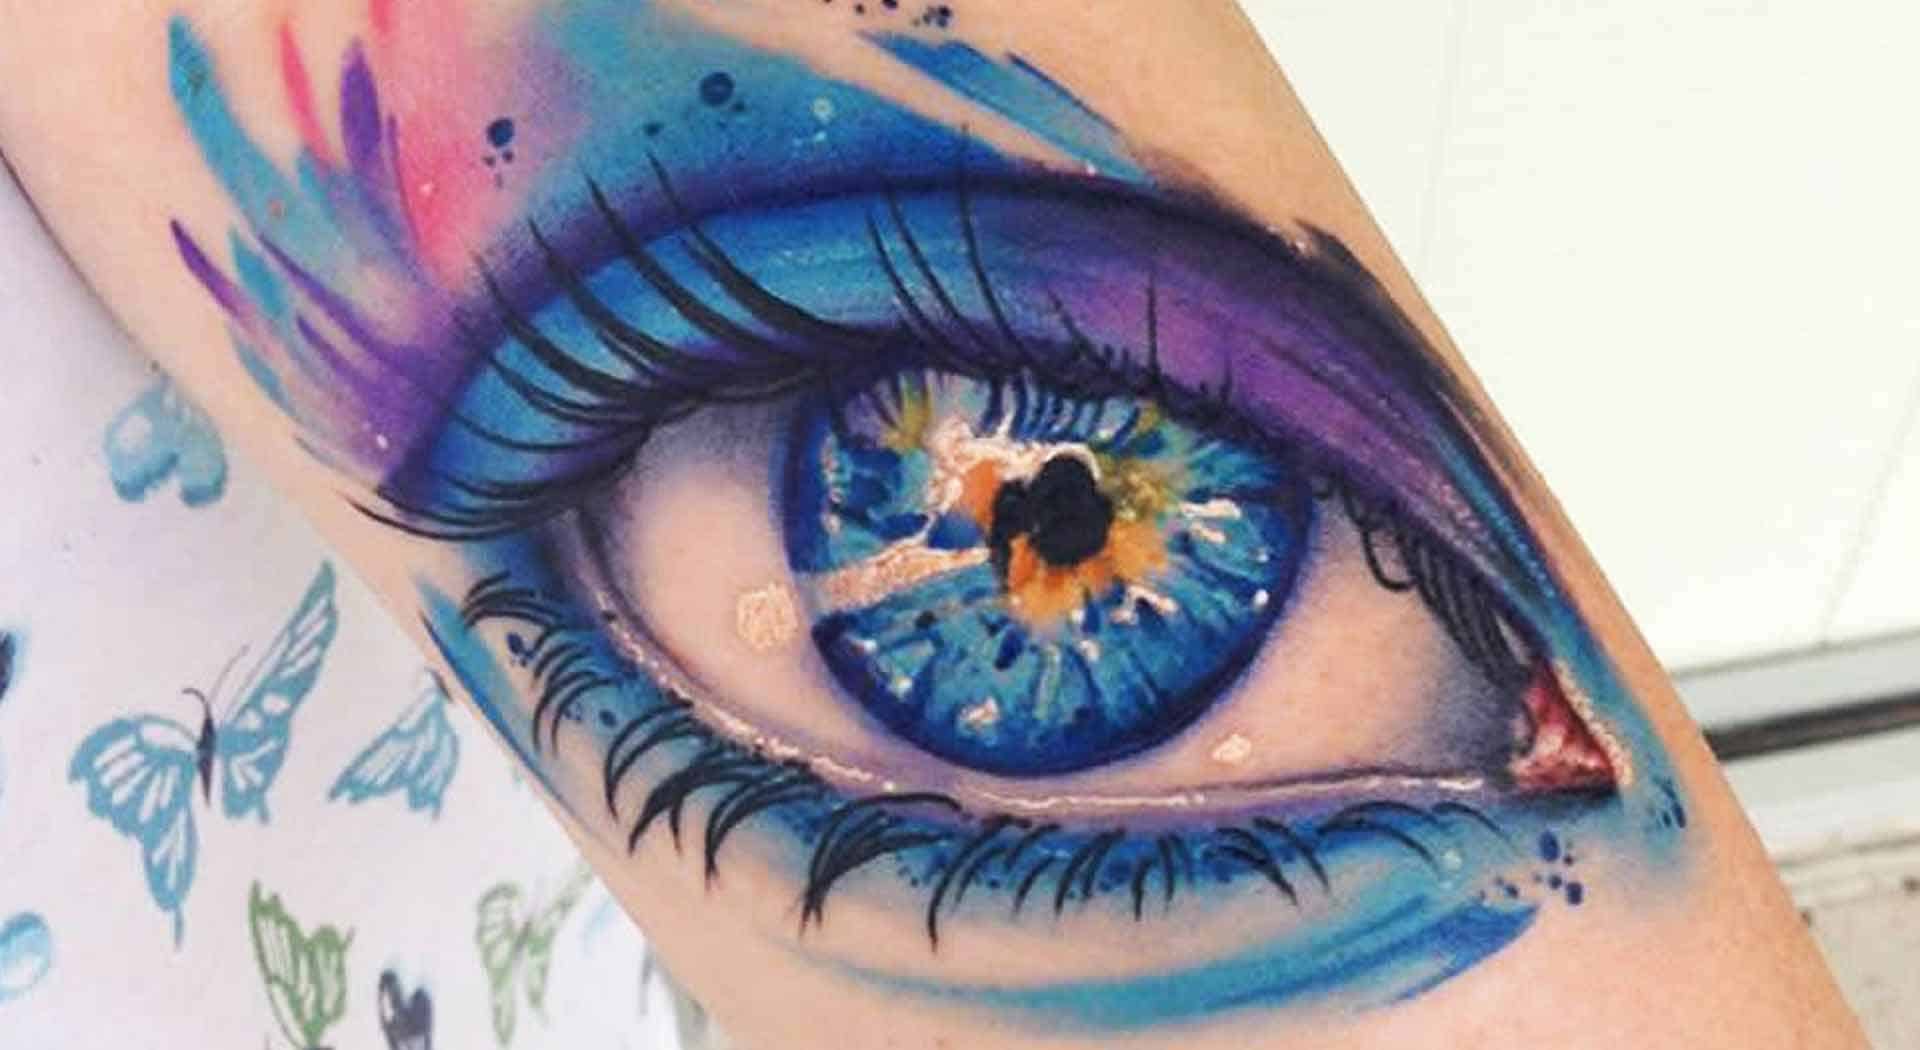 Watercolor Tattoos | Funhouse Tattoo: International Guesthouse